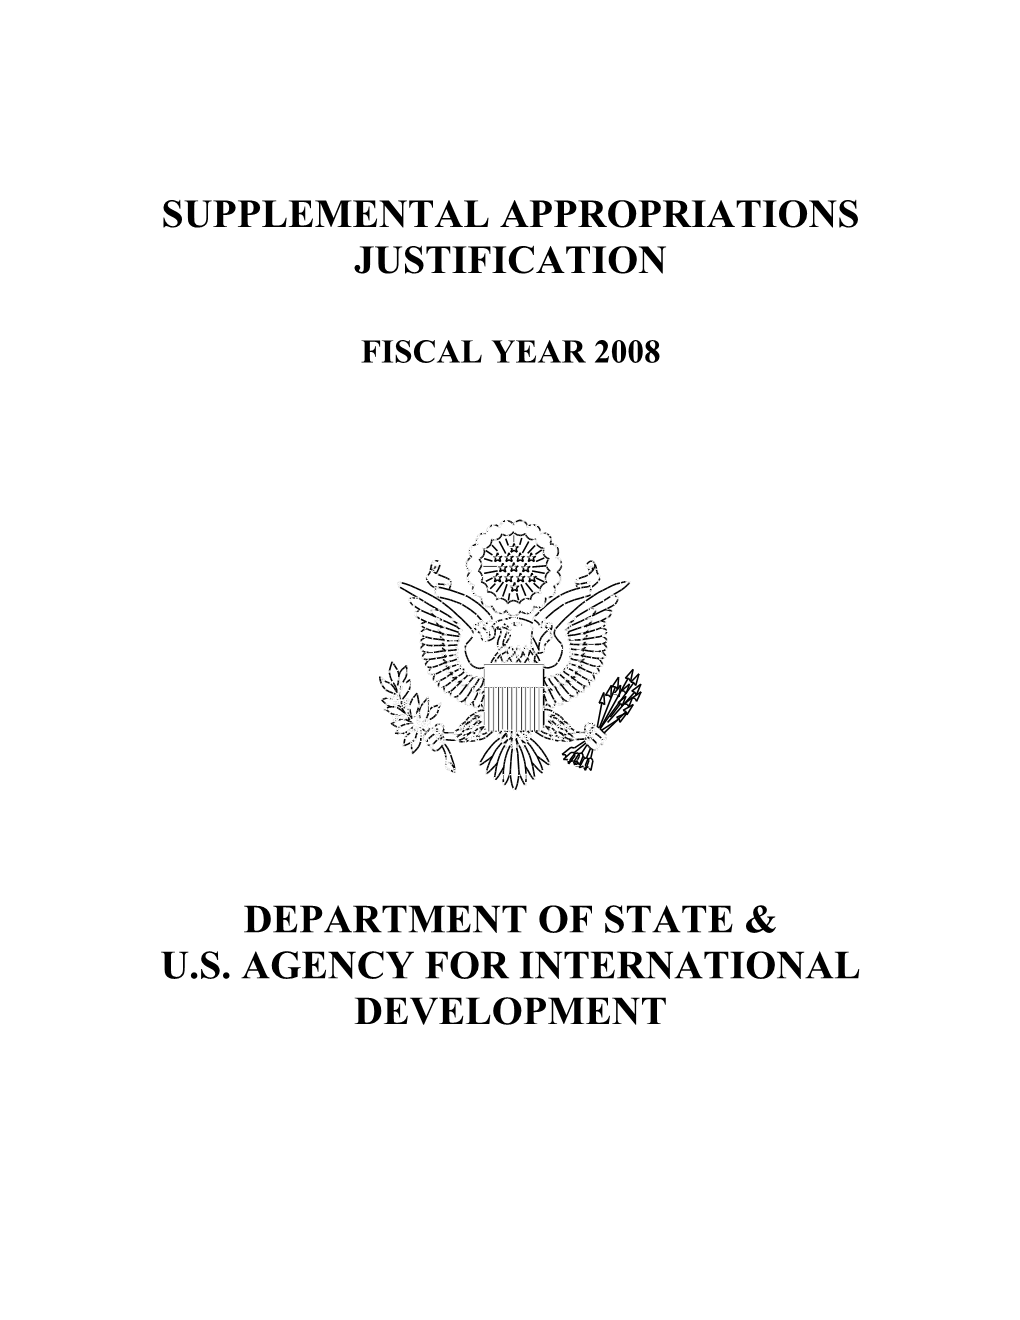 Fy 2006 Supplemental Appropriations